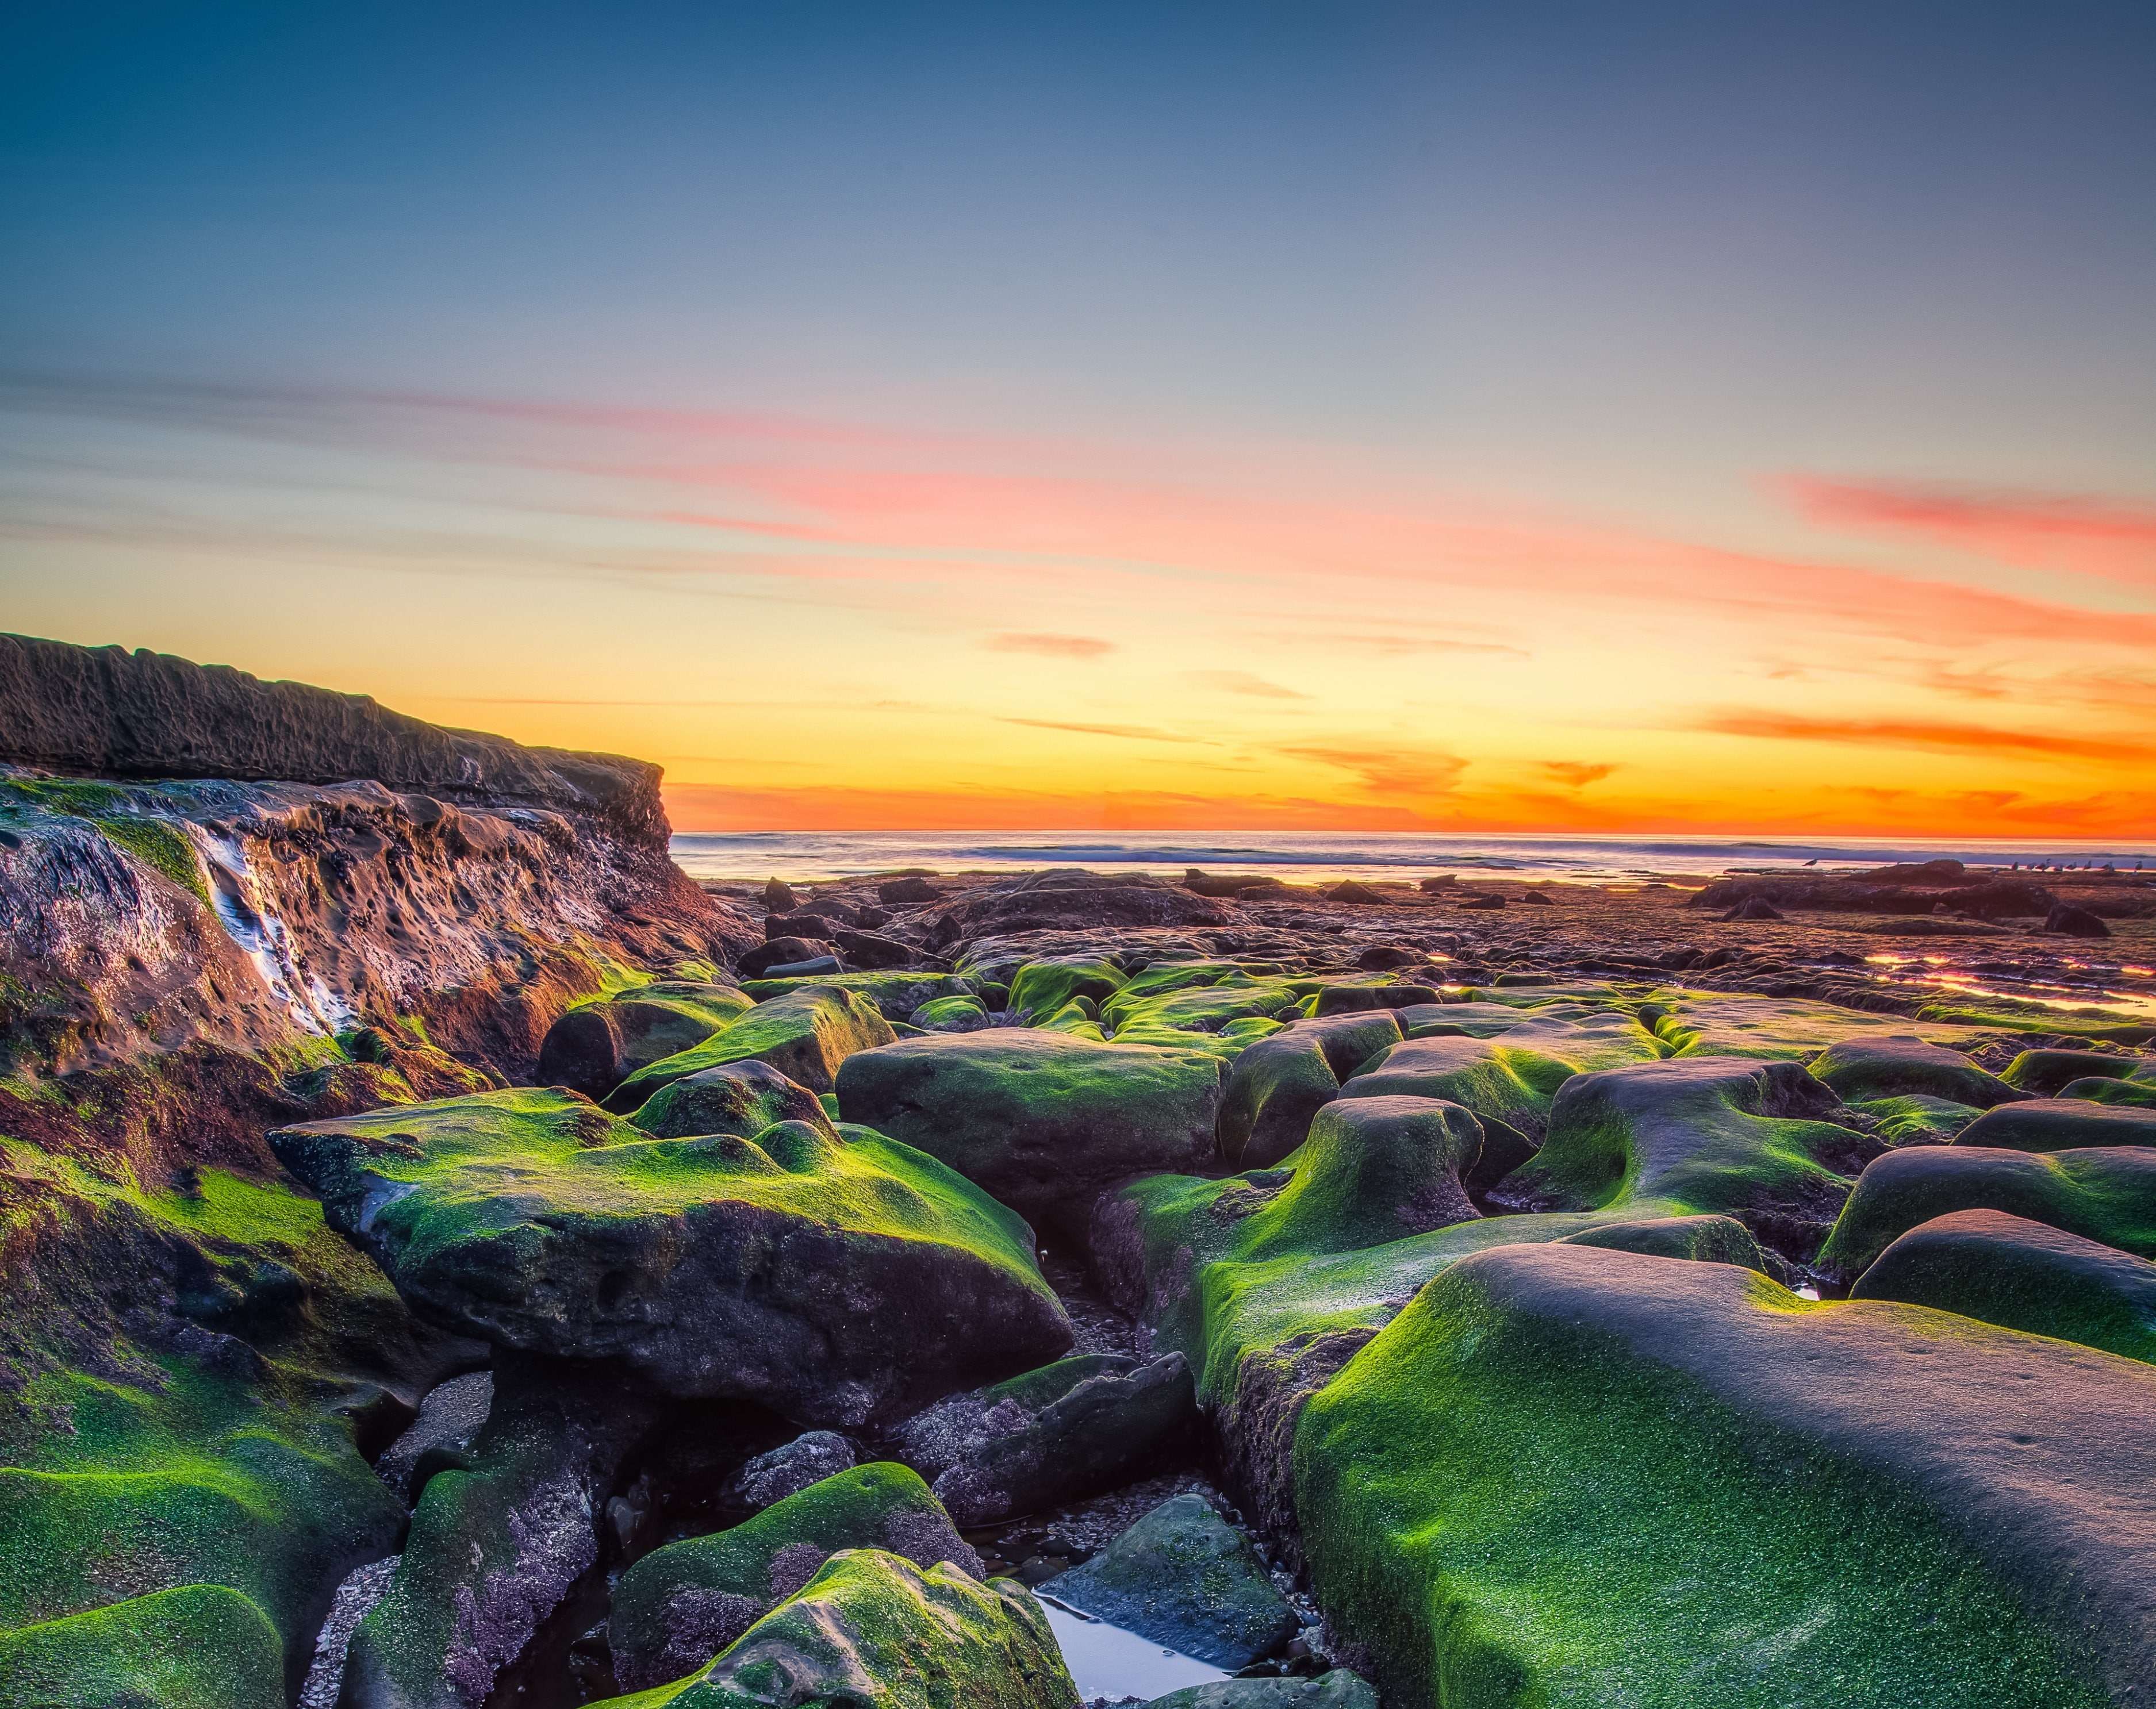 Low Tide, United States, California, Green, Sunset, Rock, Shore